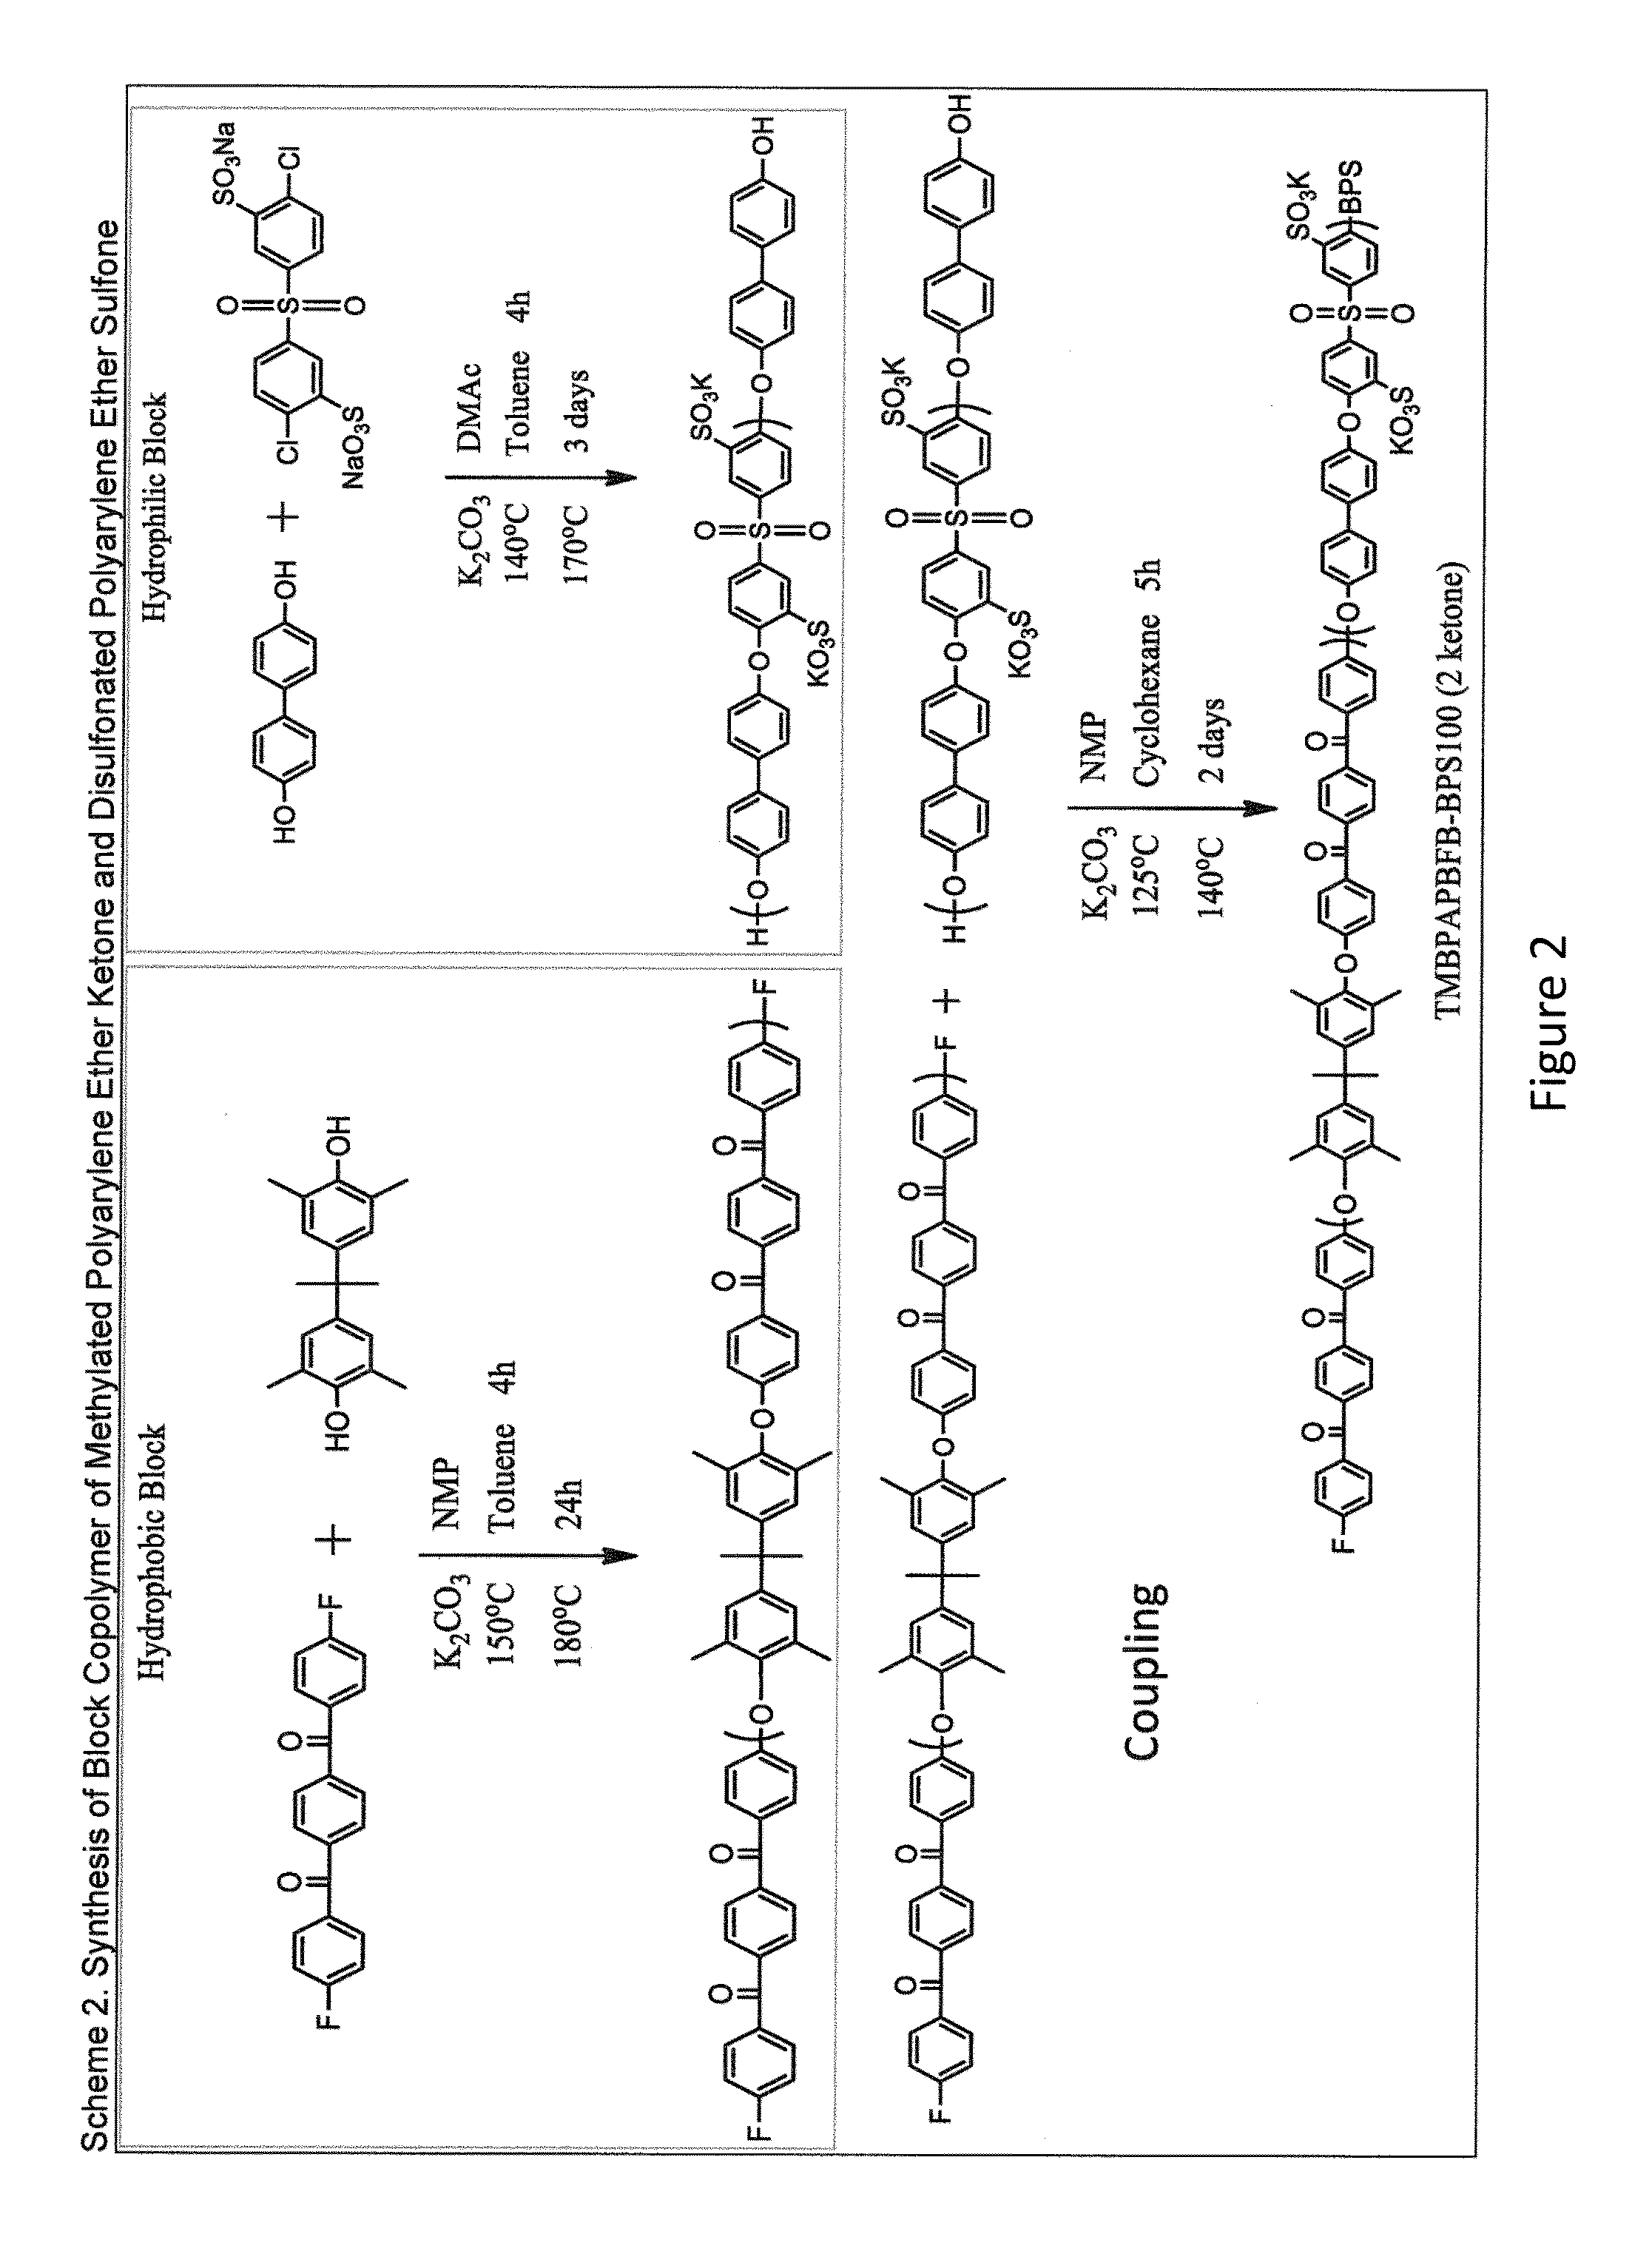 Crosslinked Polymer Compositions, Gas Separation Membranes of Such Crosslinked Polymer Compositions, Methods Of Making Such Membranes, and Methods of Separating Gases Using Such Membranes